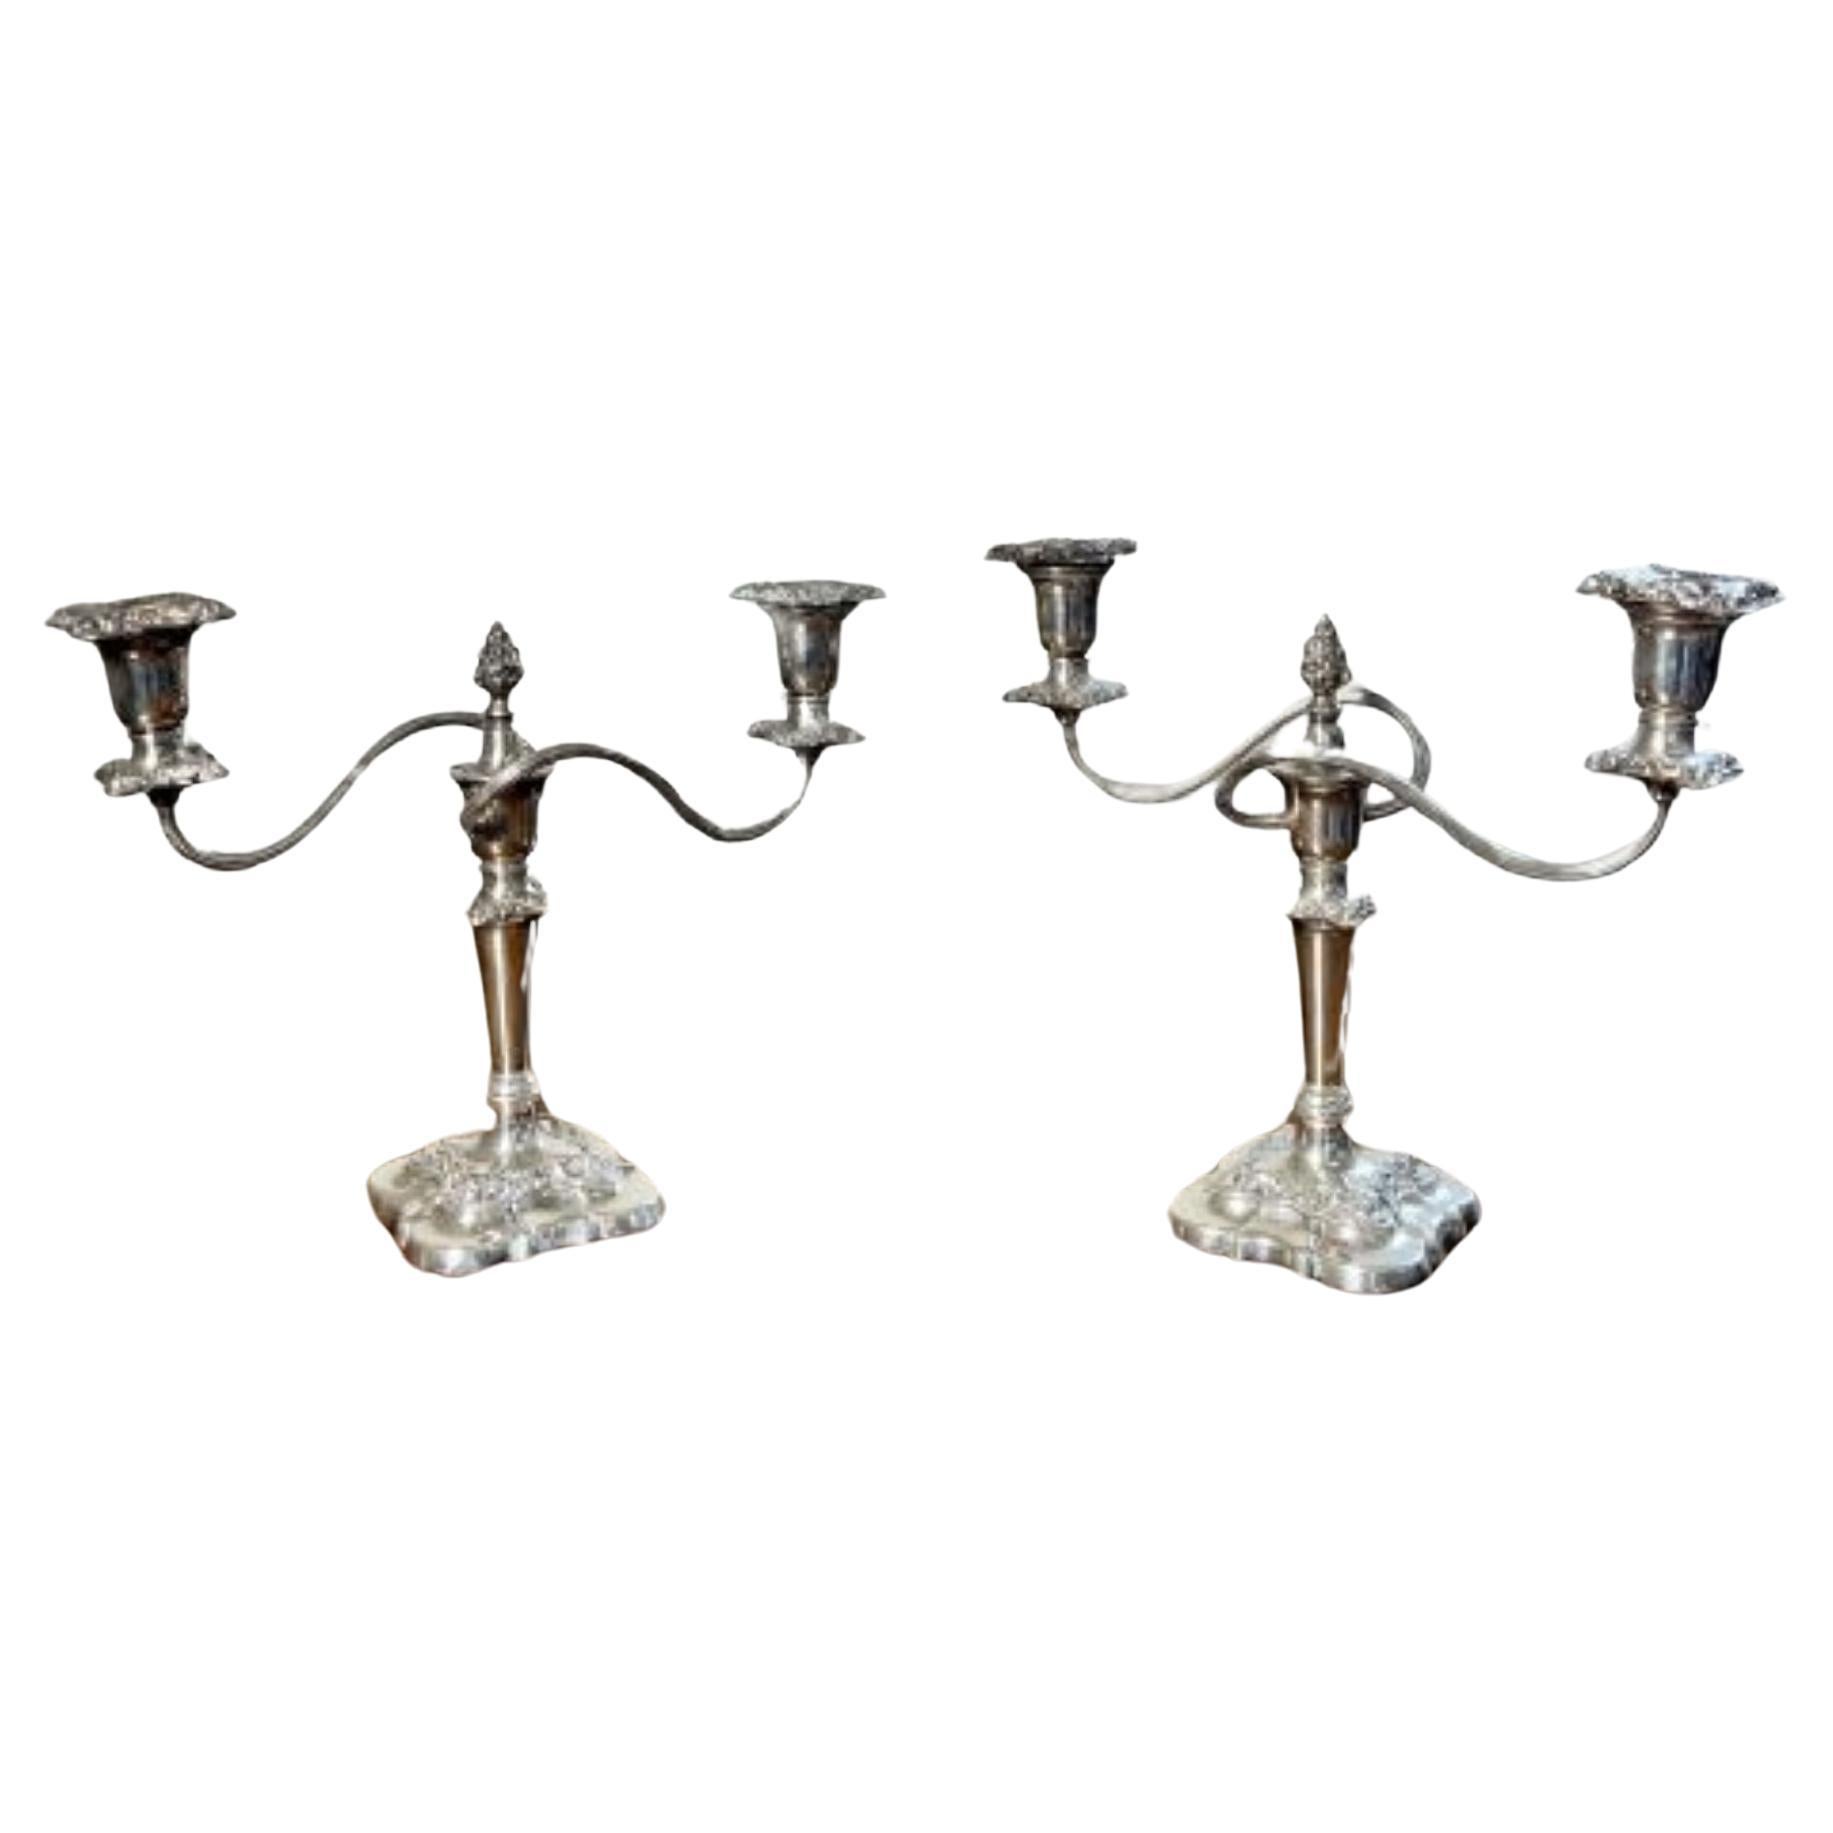 Stunning pair of antique Edwardian silver plated ornate candelabras For Sale